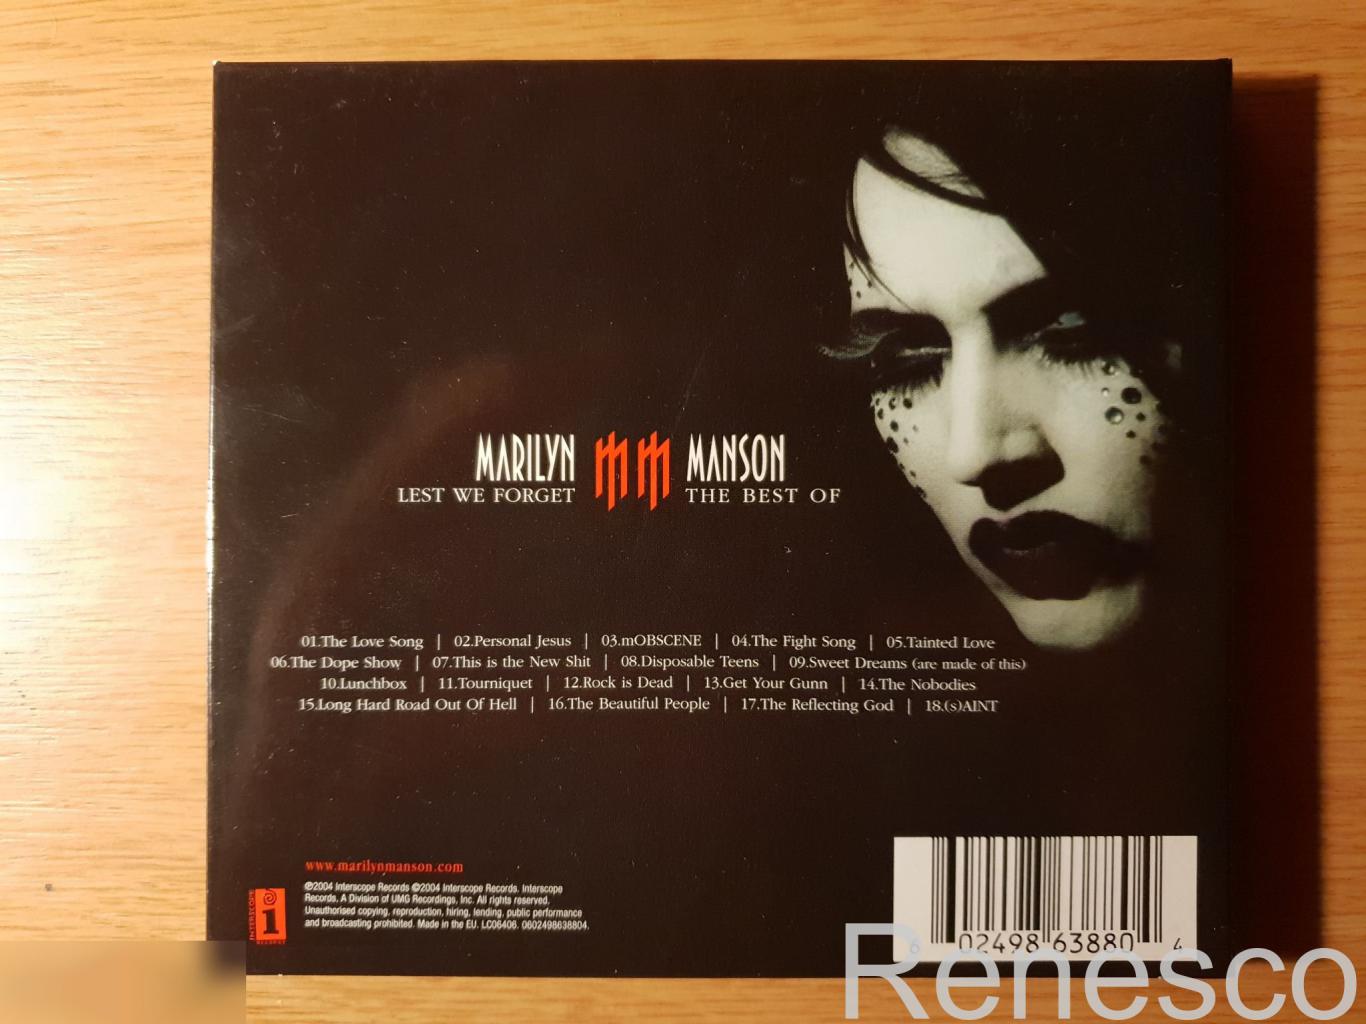 Marilyn Manson ?– Lest We Forget - The Best Of (2004) (Europe) (Deluxe Edition) 1